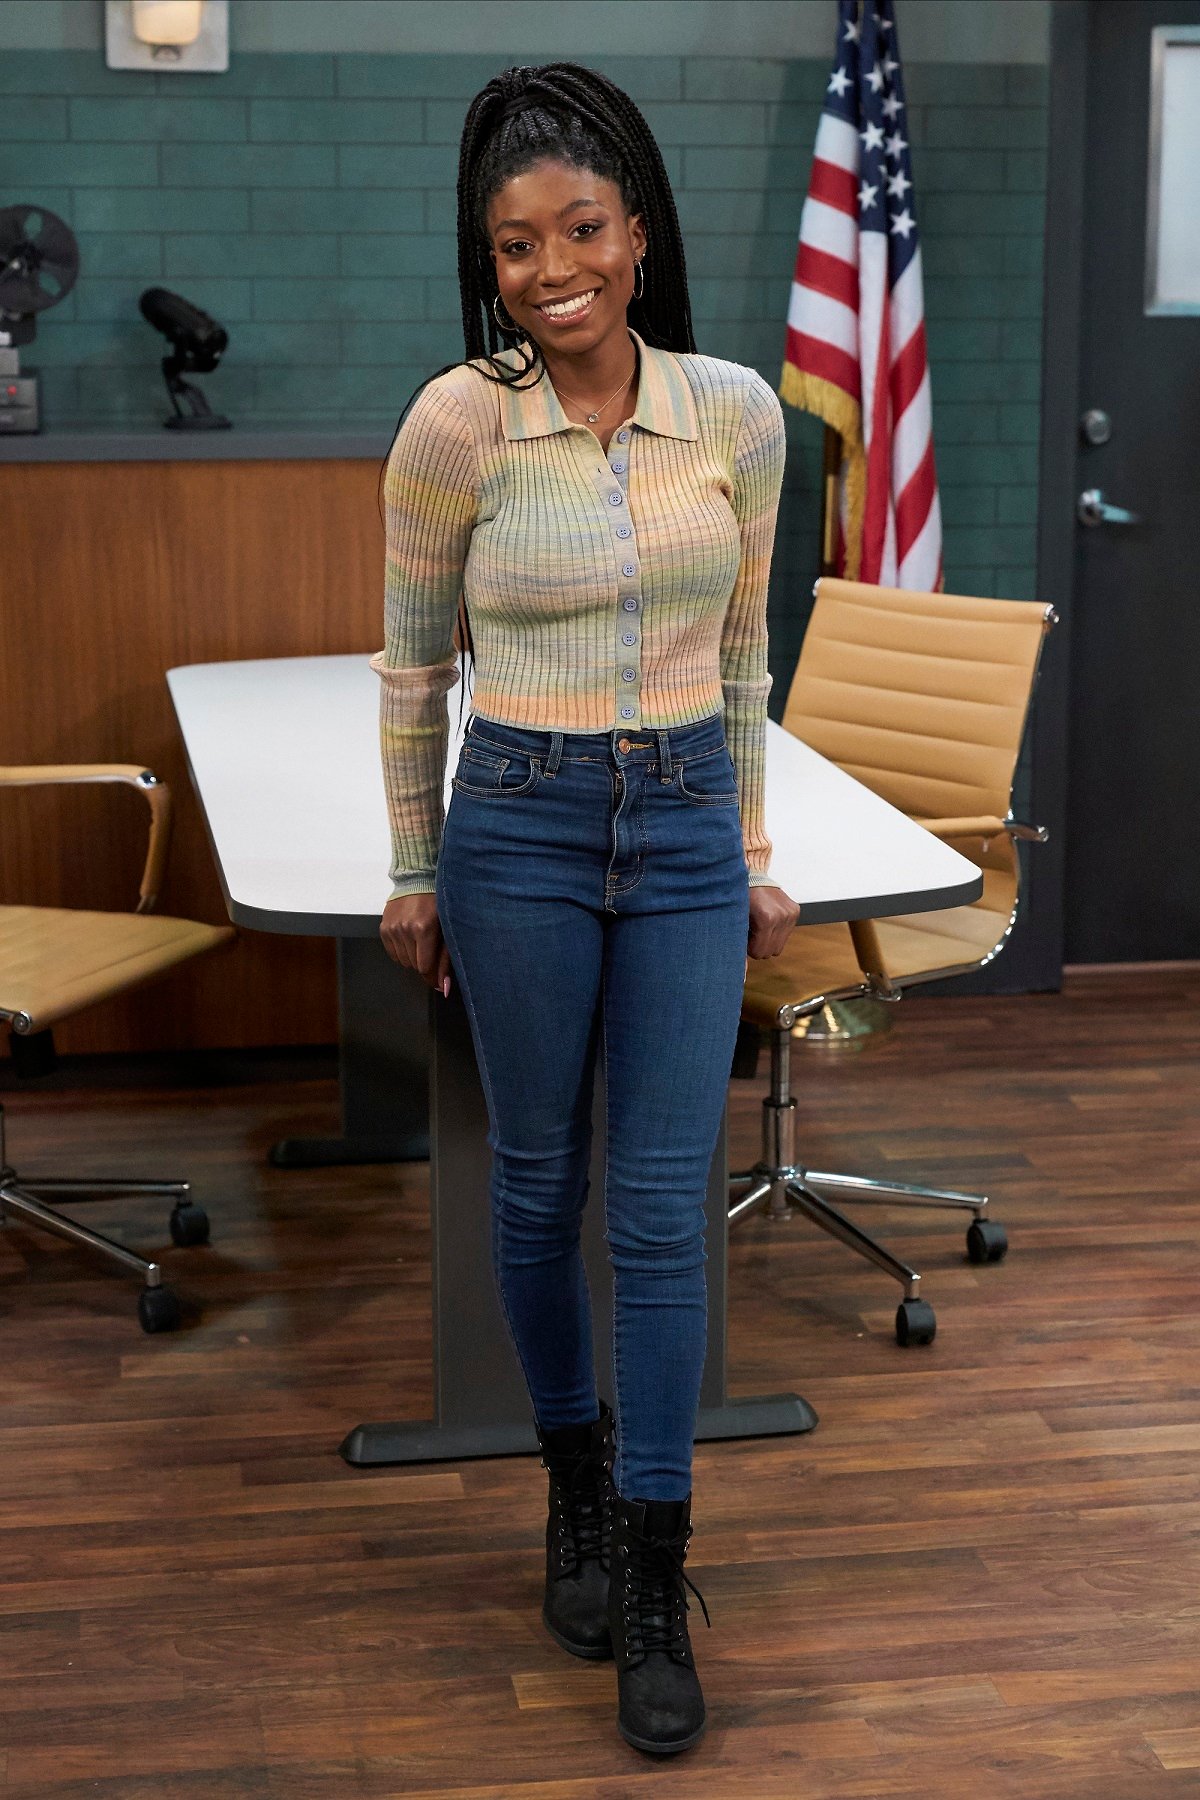 'General Hospital' actor Tabyana Ali wearing a rainbow colored sweater and jeans; stands in the interrogation room set.